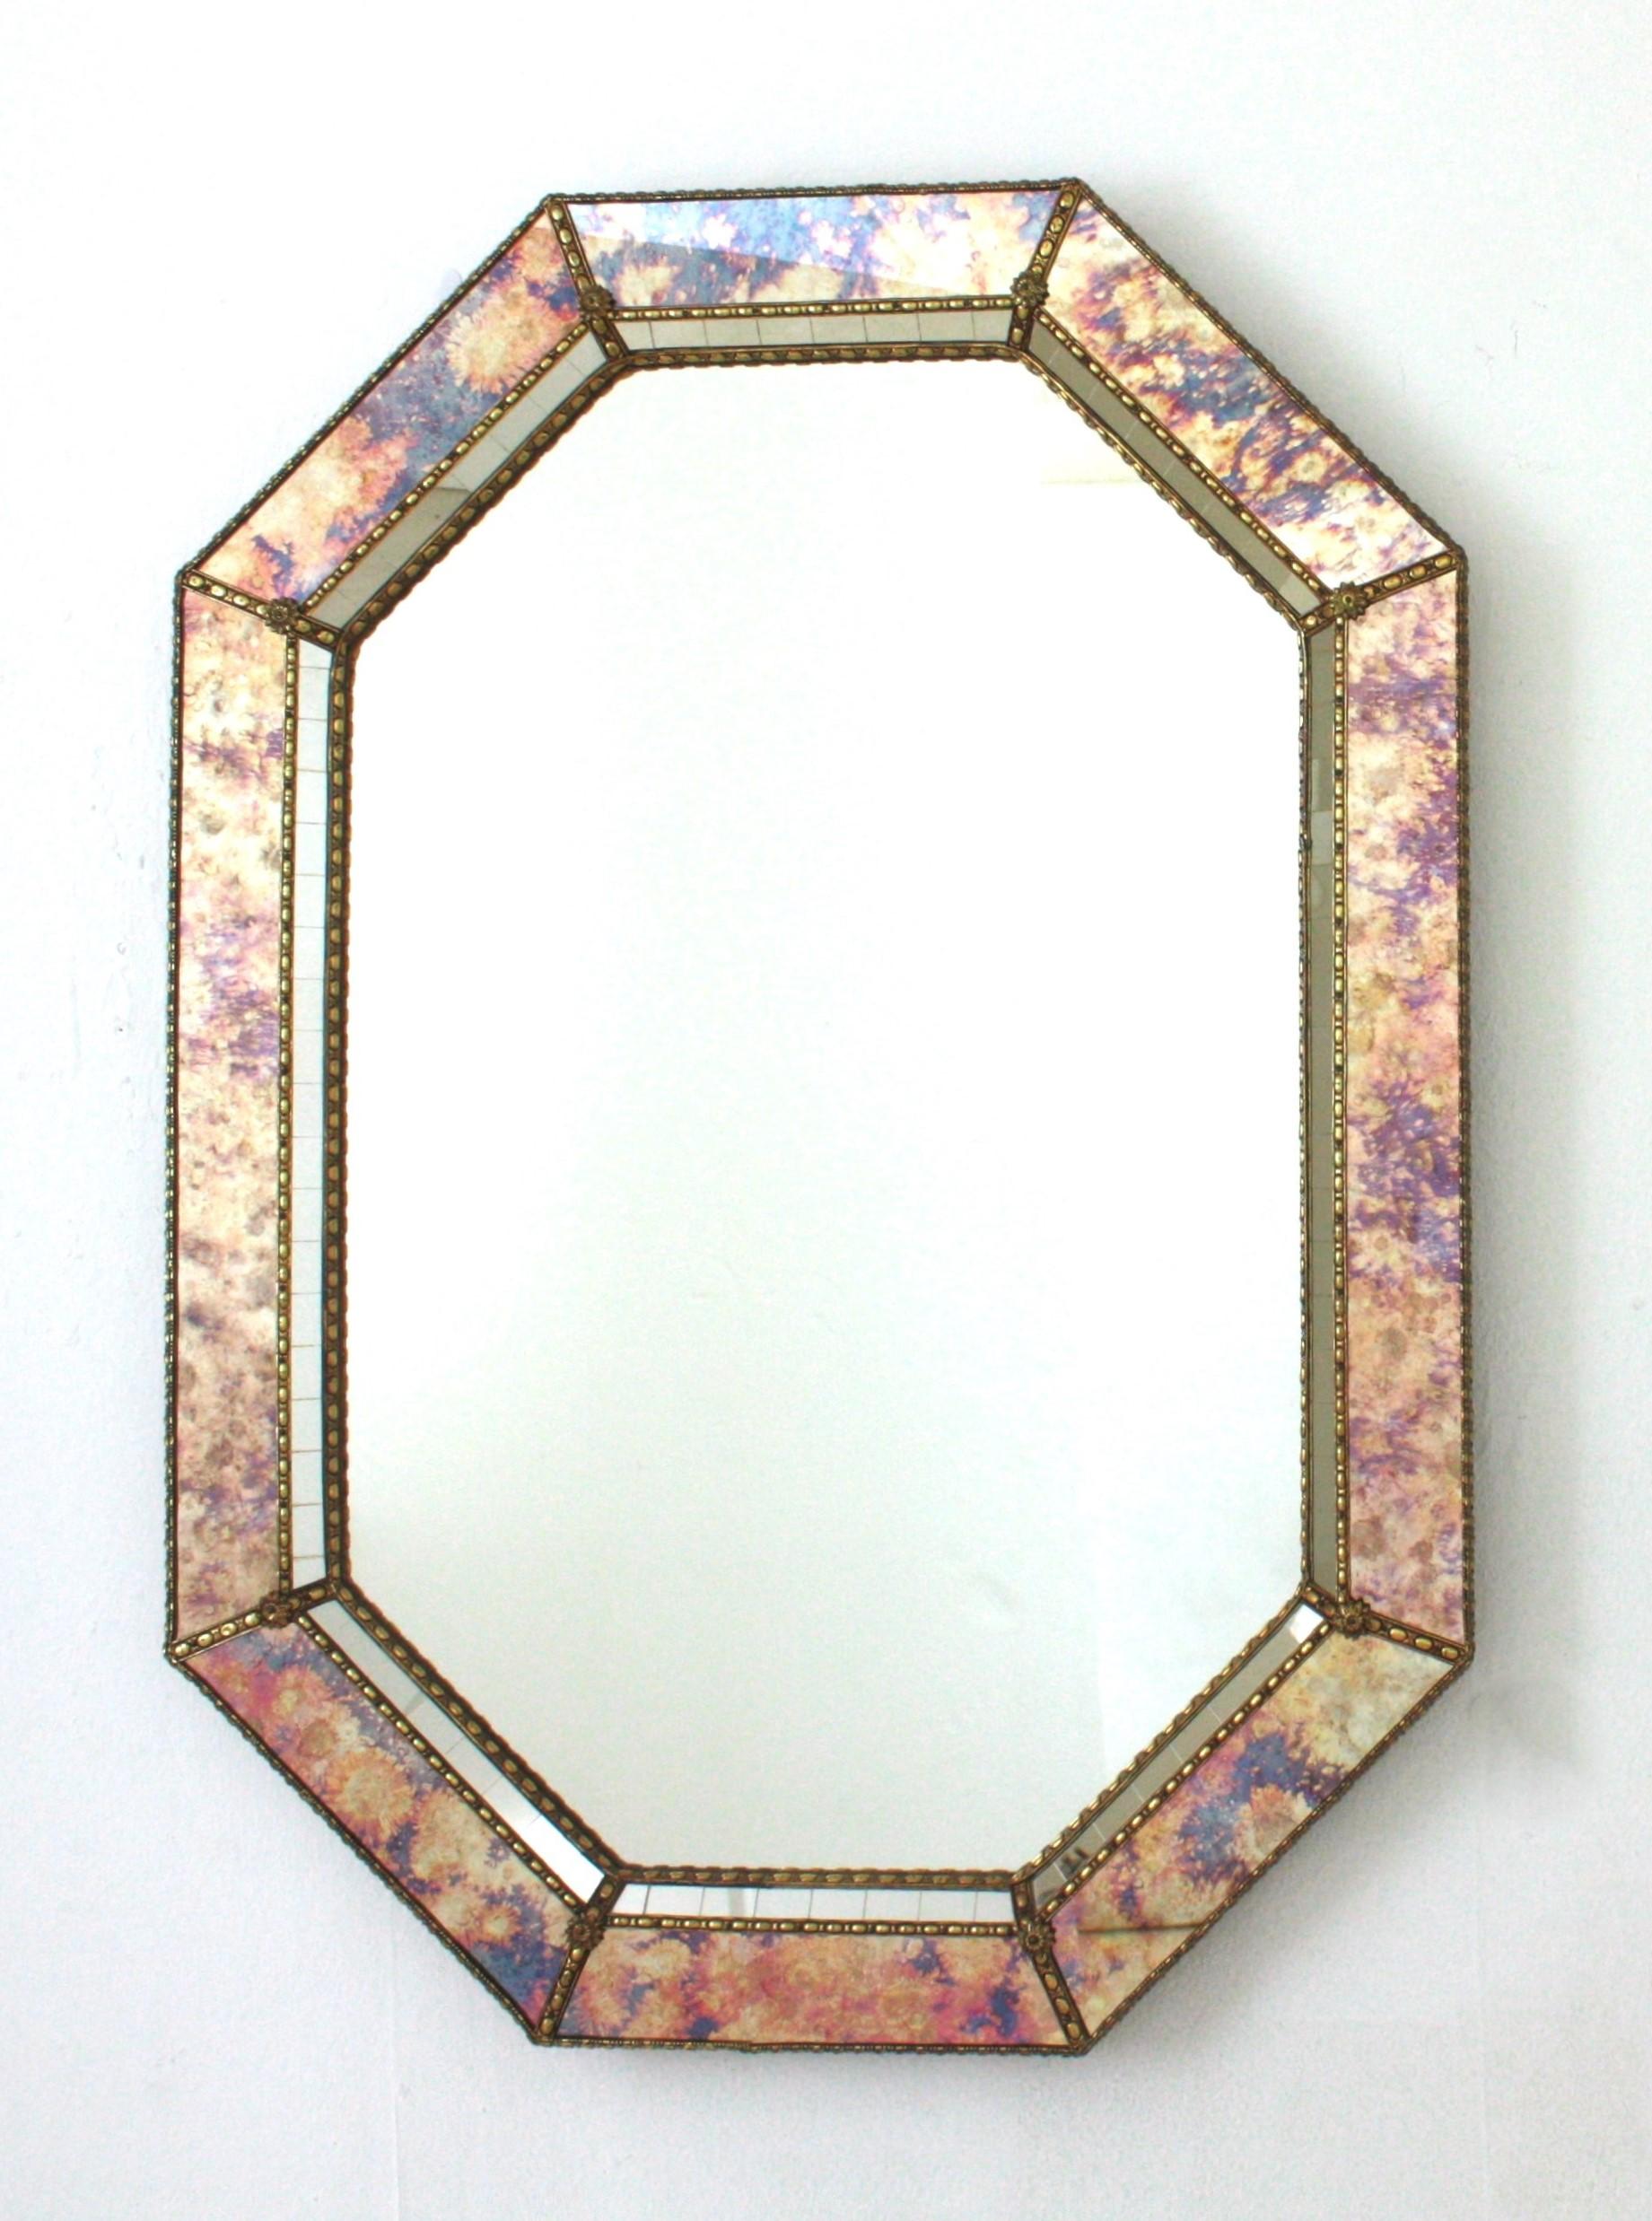 Hand-Crafted Octagonal Venetian Style Mirrors with Pink Purple Glass & Brass Details, Pair For Sale